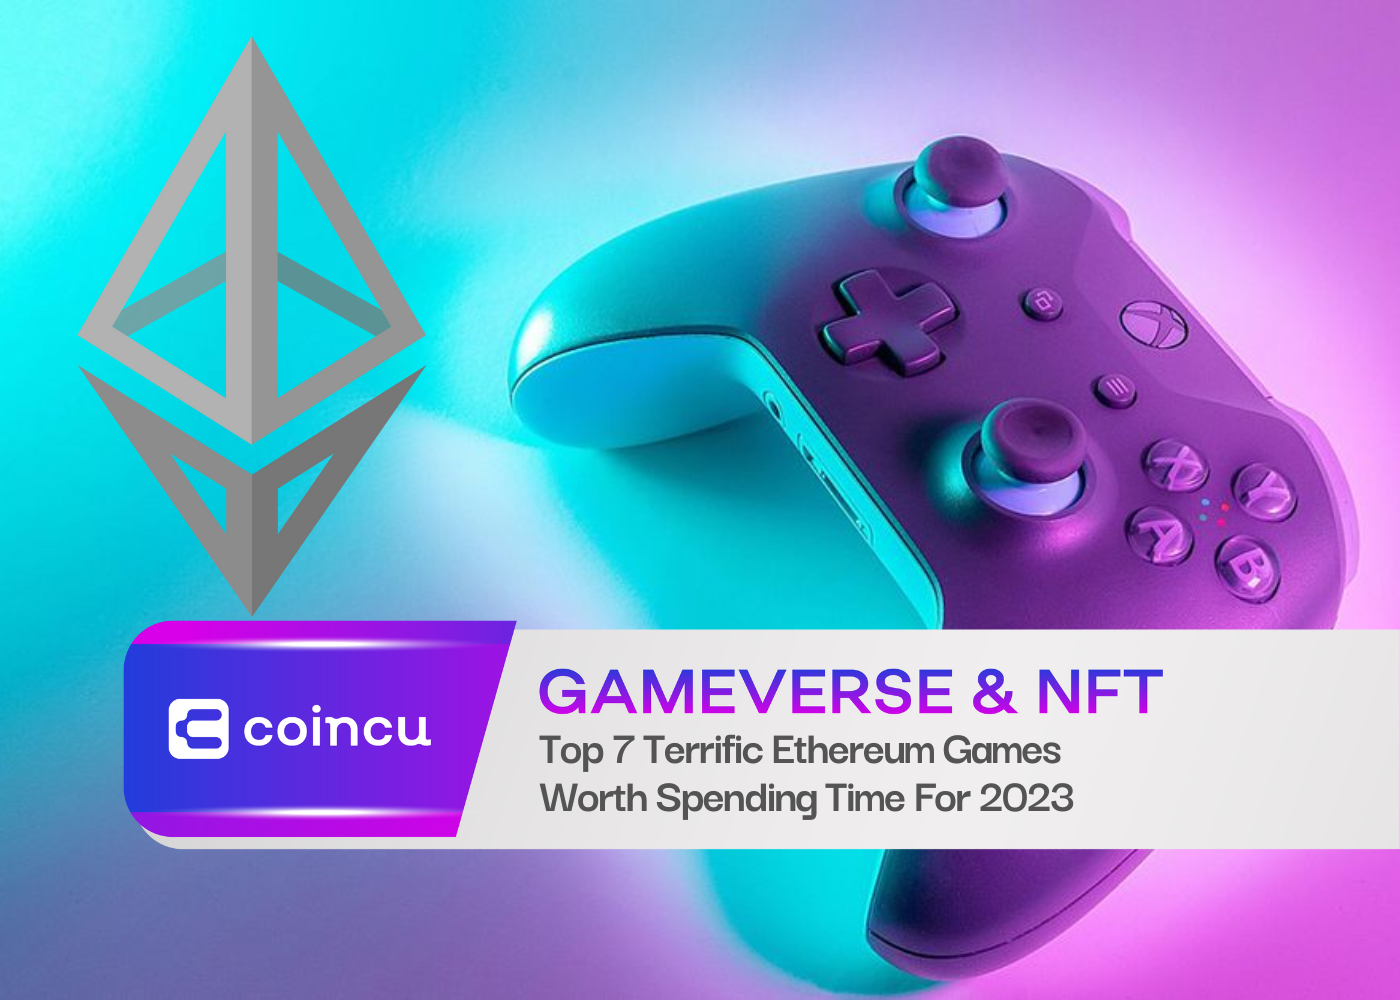 Top 7 Terrific Ethereum Games Worth Spending Time For 2023